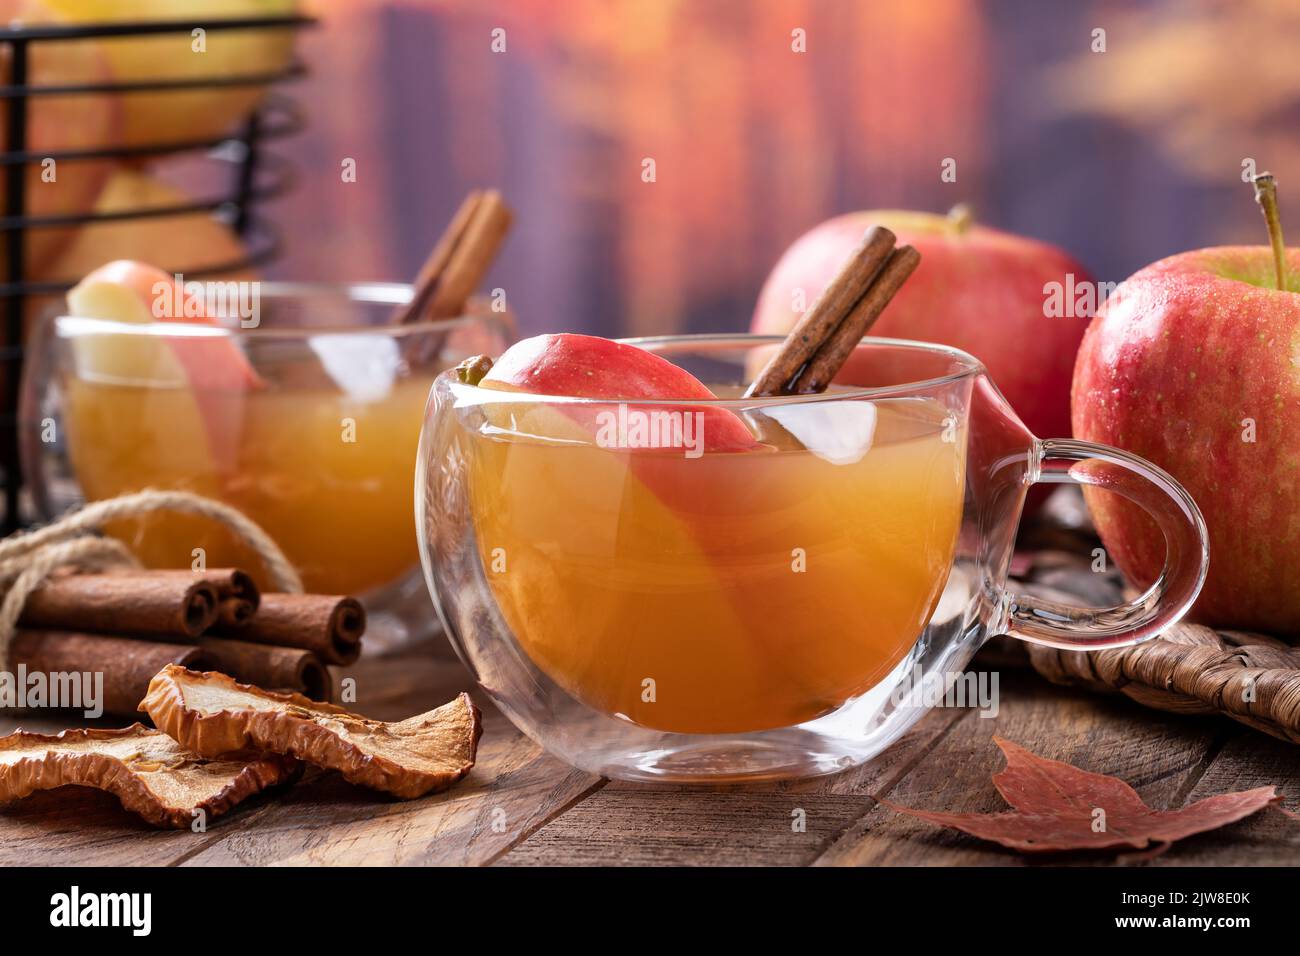 Cup of apple cider with apple slice and cinnamon stick on rustic wooden table with autumn background Stock Photo